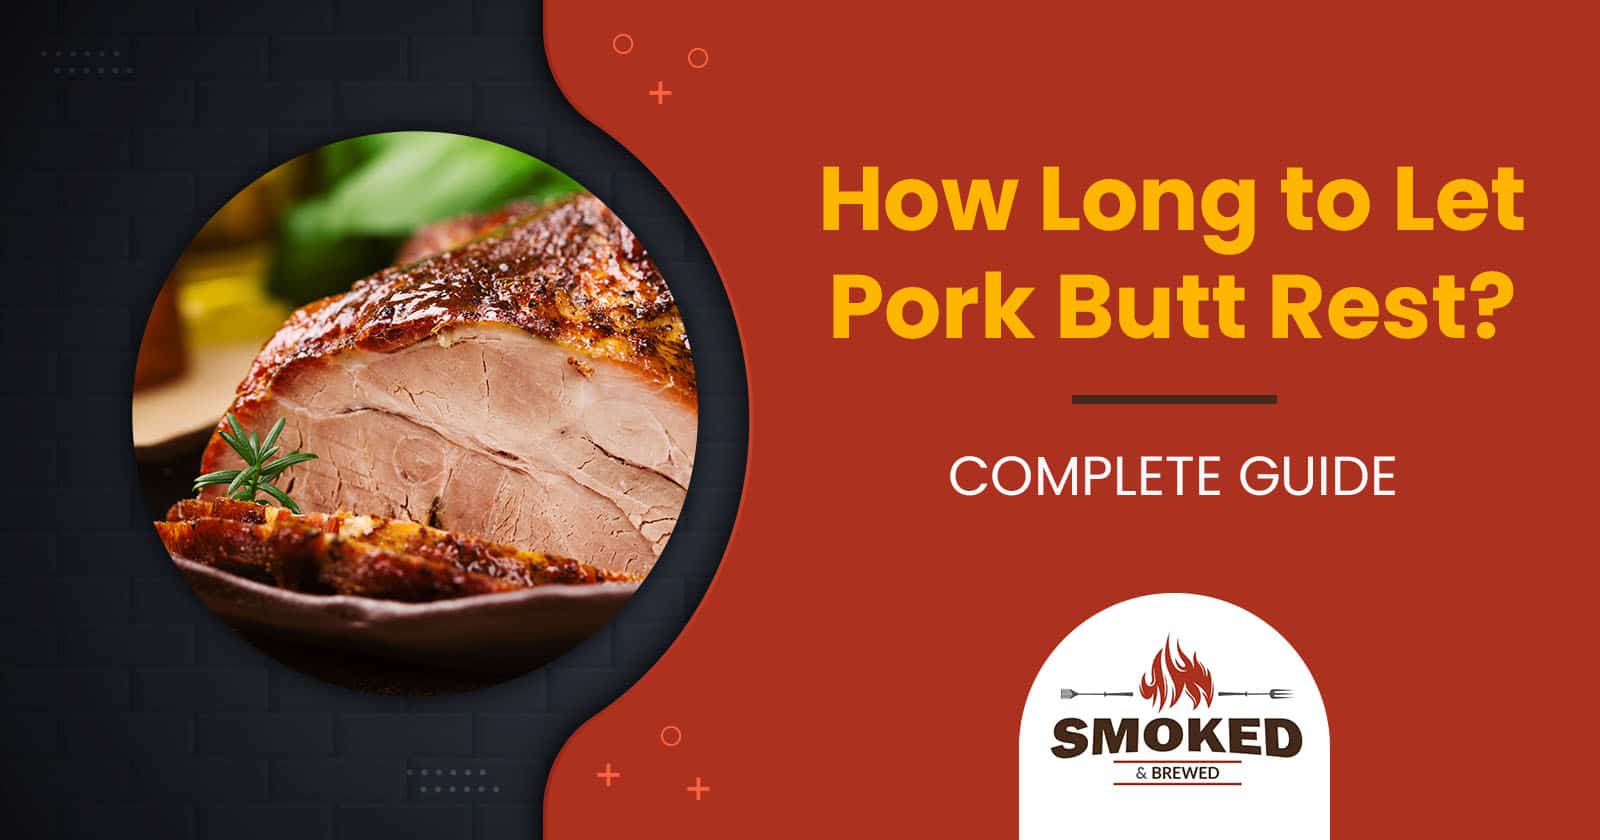 How Long to Let Pork Butt Rest? [COMPLETE GUIDE]